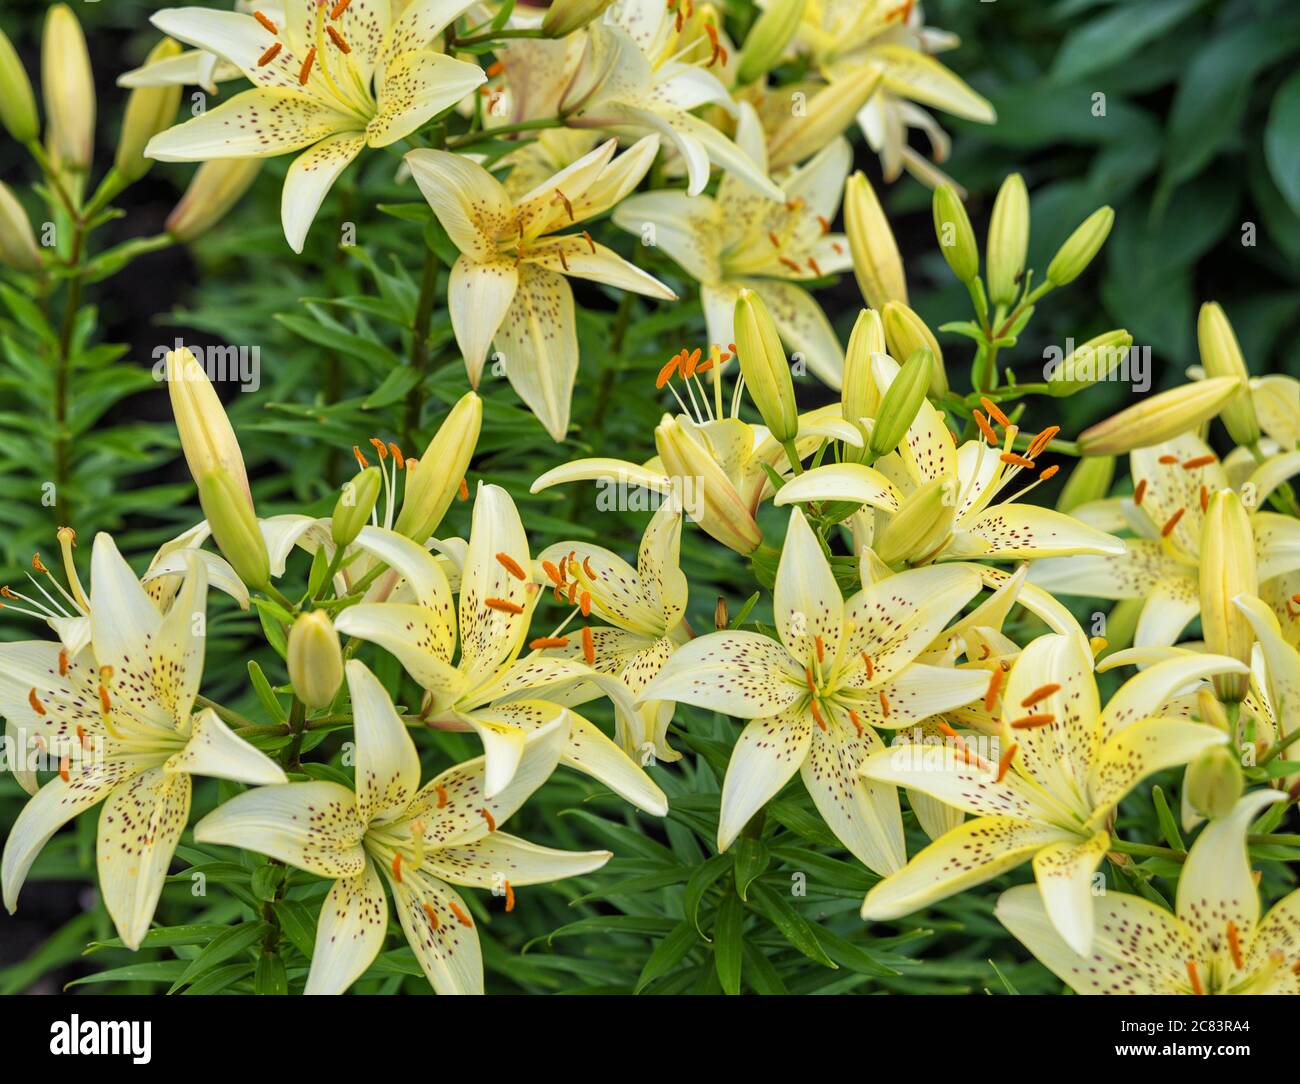 Large flowers of light yellow mottled lilies outdoors close-up Stock Photo